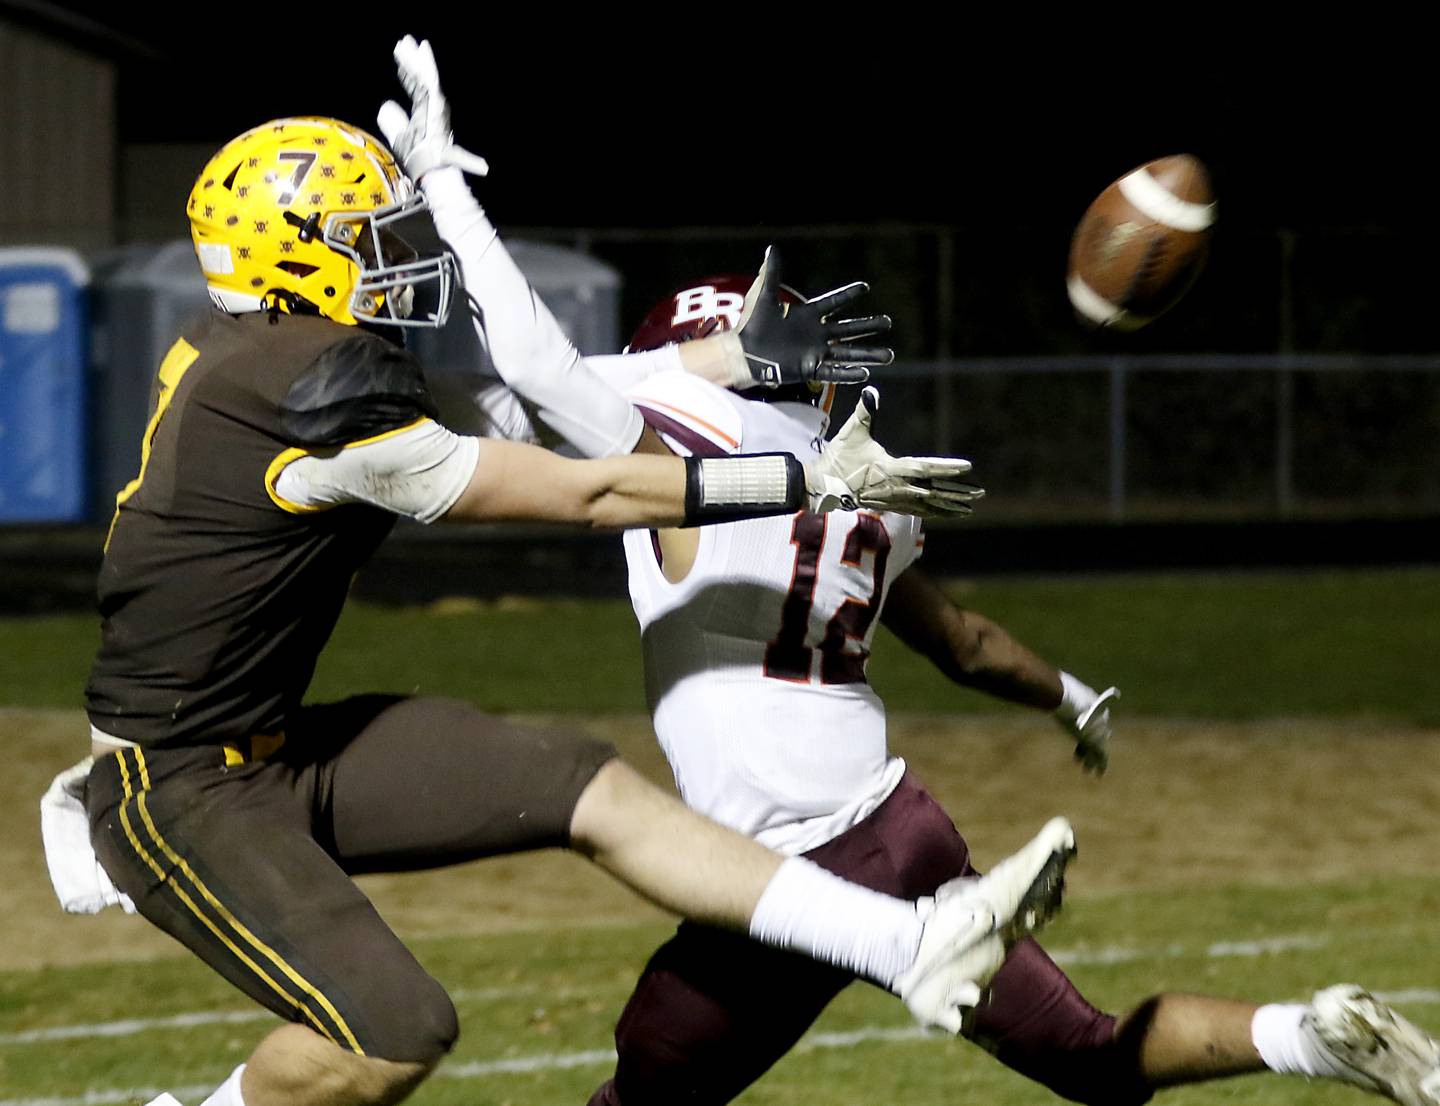 Jacobs' Grant Stec tries to catch the ball as he is defended by Brother Rice's Sidney Green during a IHSA Class 7A first round playoff football game Friday, Oct. 28, 2022, between Jacobs and Brother Rice at Jacobs High School in Algonquin.